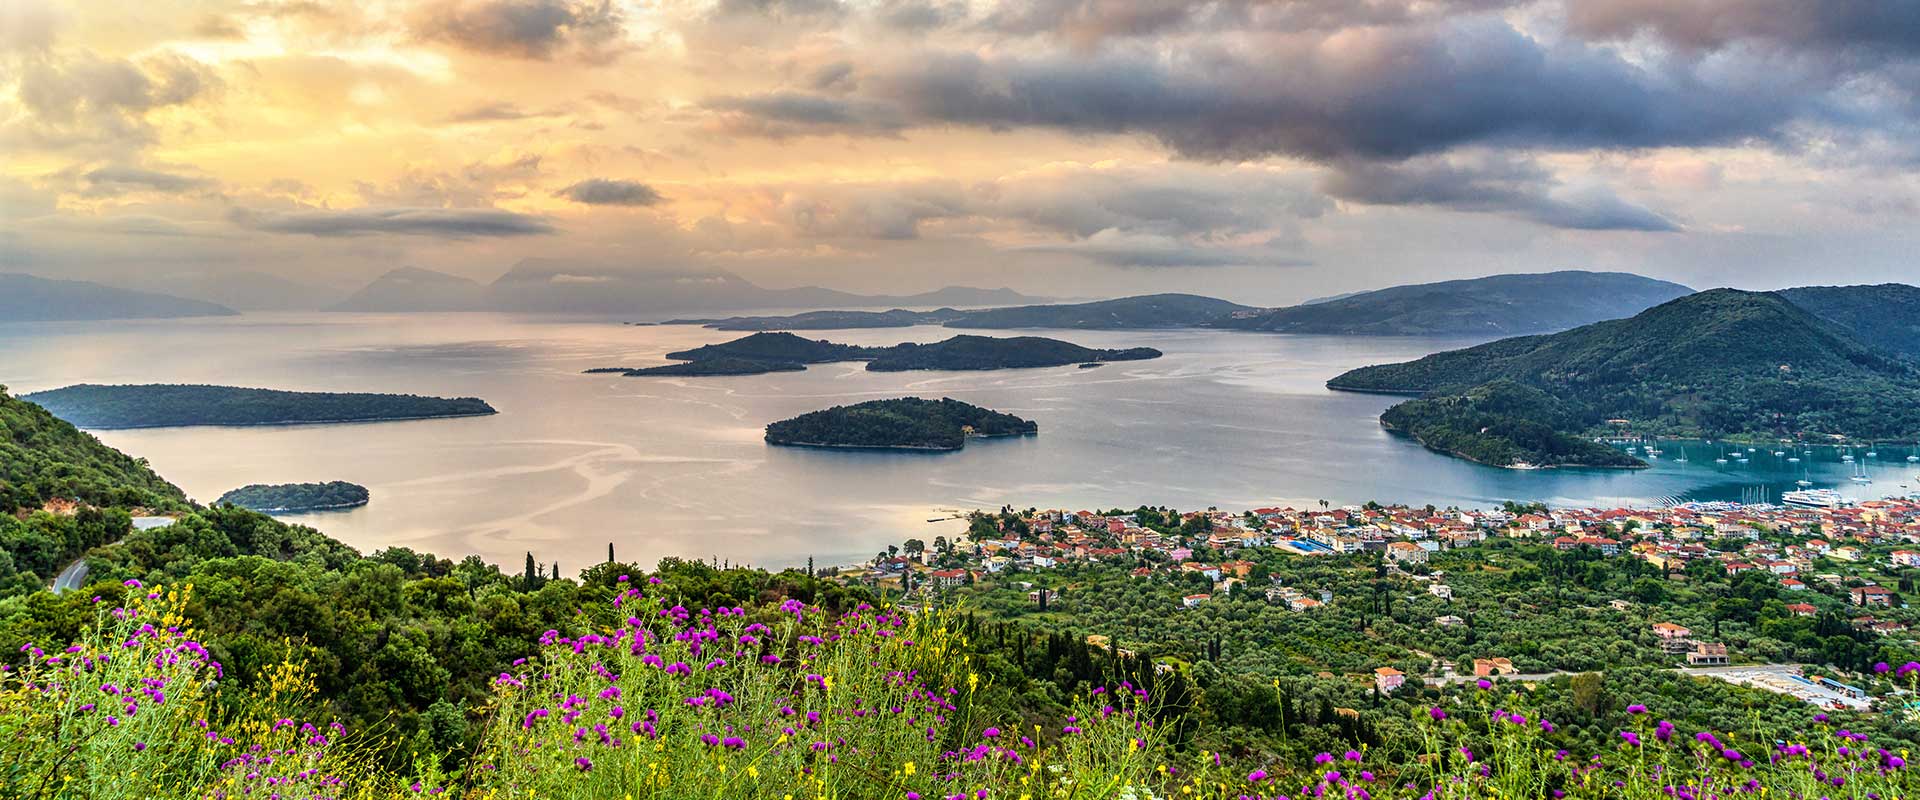 Panoramic view from the top of the hill, overlooking Nydri and the nearby islands of Lefkada. Trust a reputable real estate agent in Lefkada to help you discover your dream property.